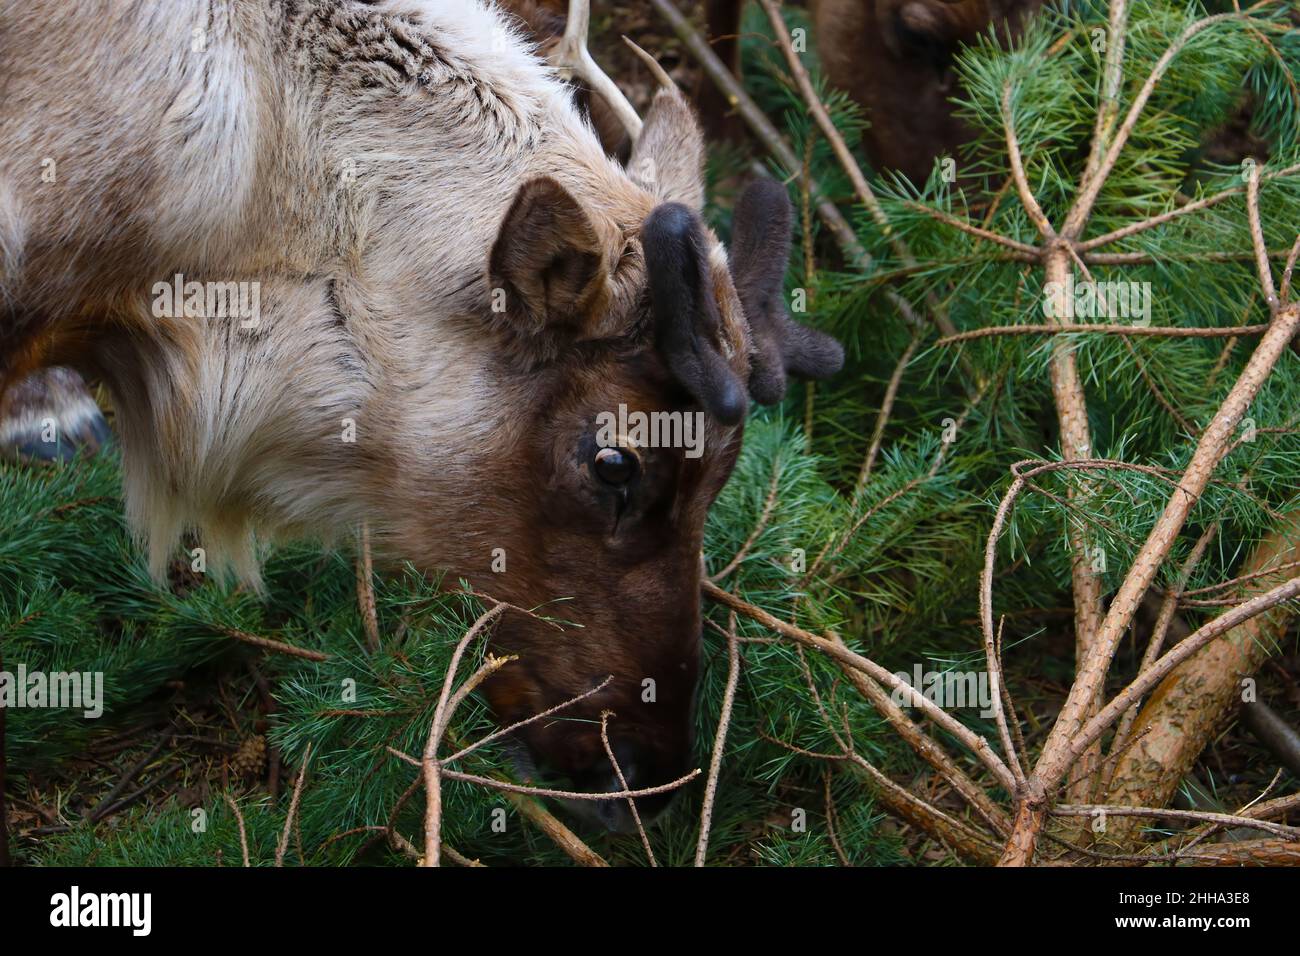 Deer eats a green pine branch in the forest Stock Photo